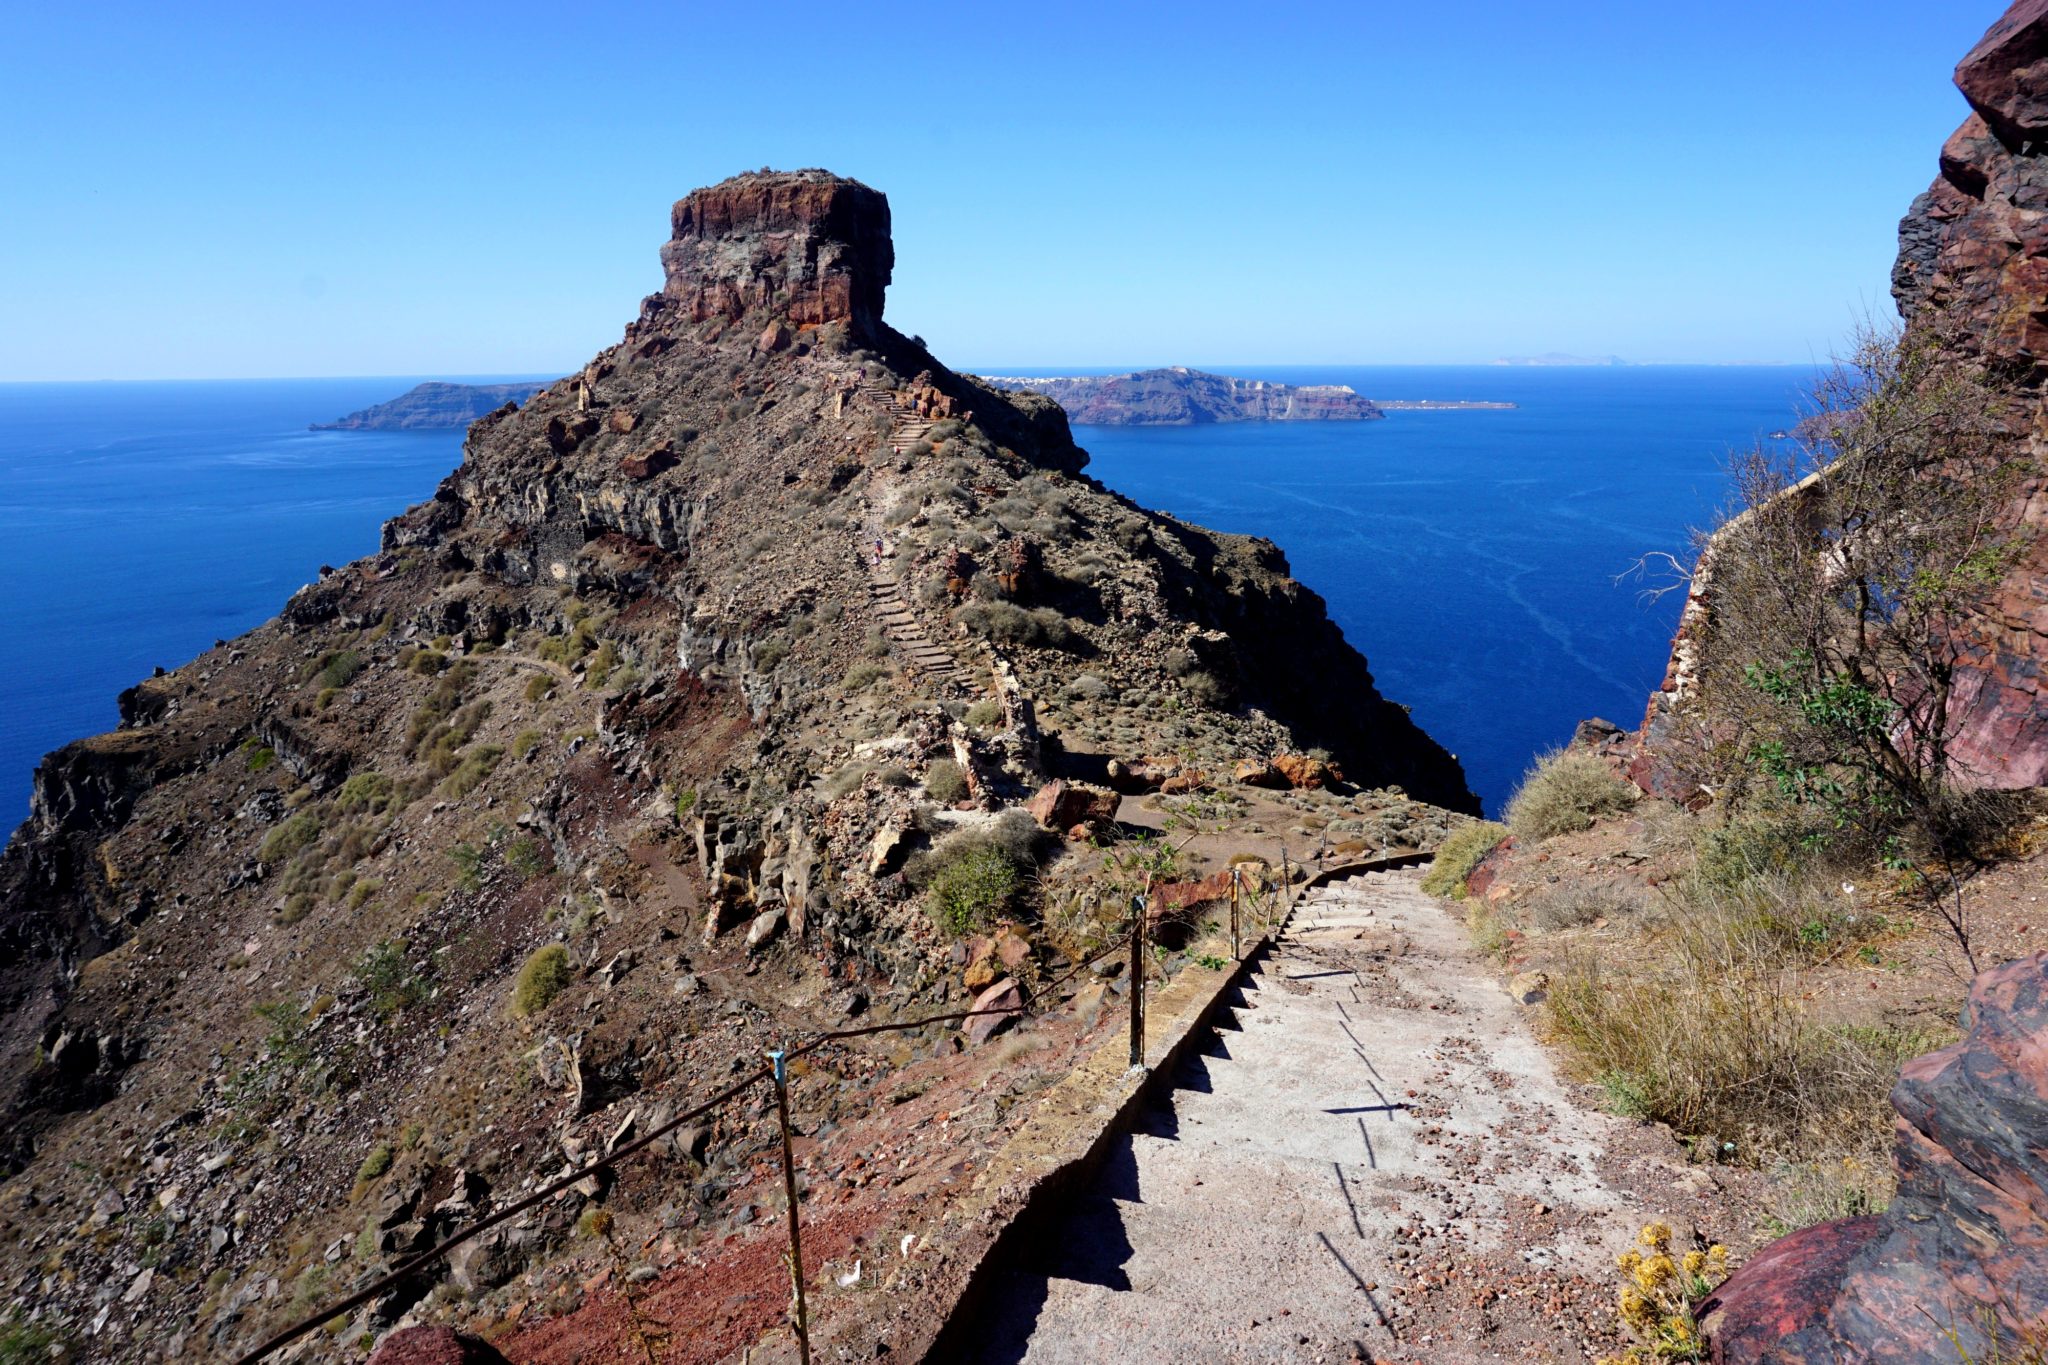 A detour from the Fira to Oia hike, but walking down to Skaros Rock is definitely worth the effort/extra time.